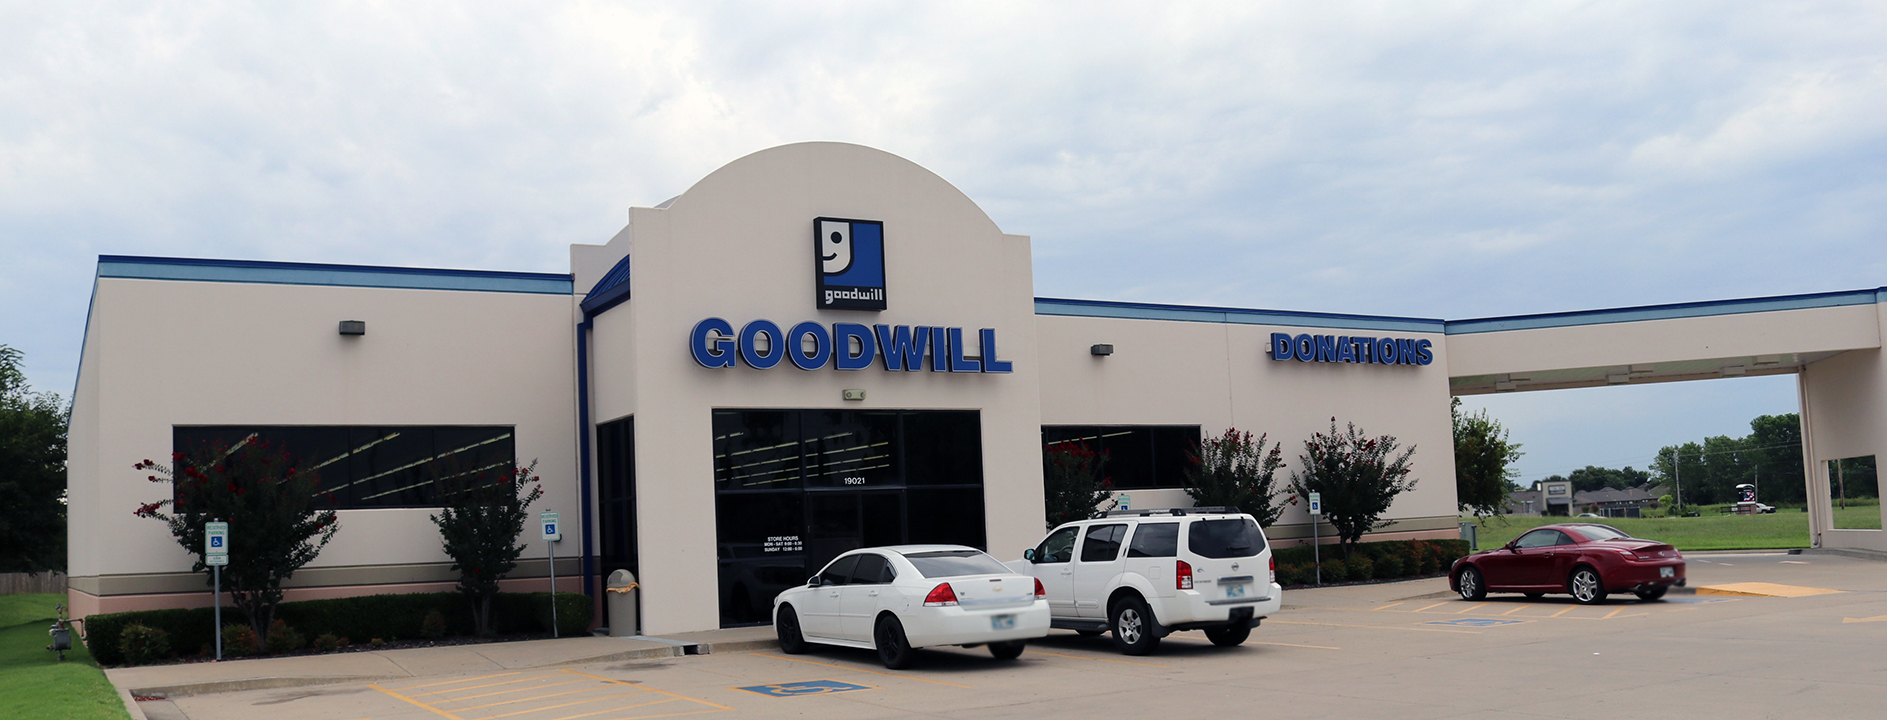 Goodwill Store And Donation Center (Stone Creek)